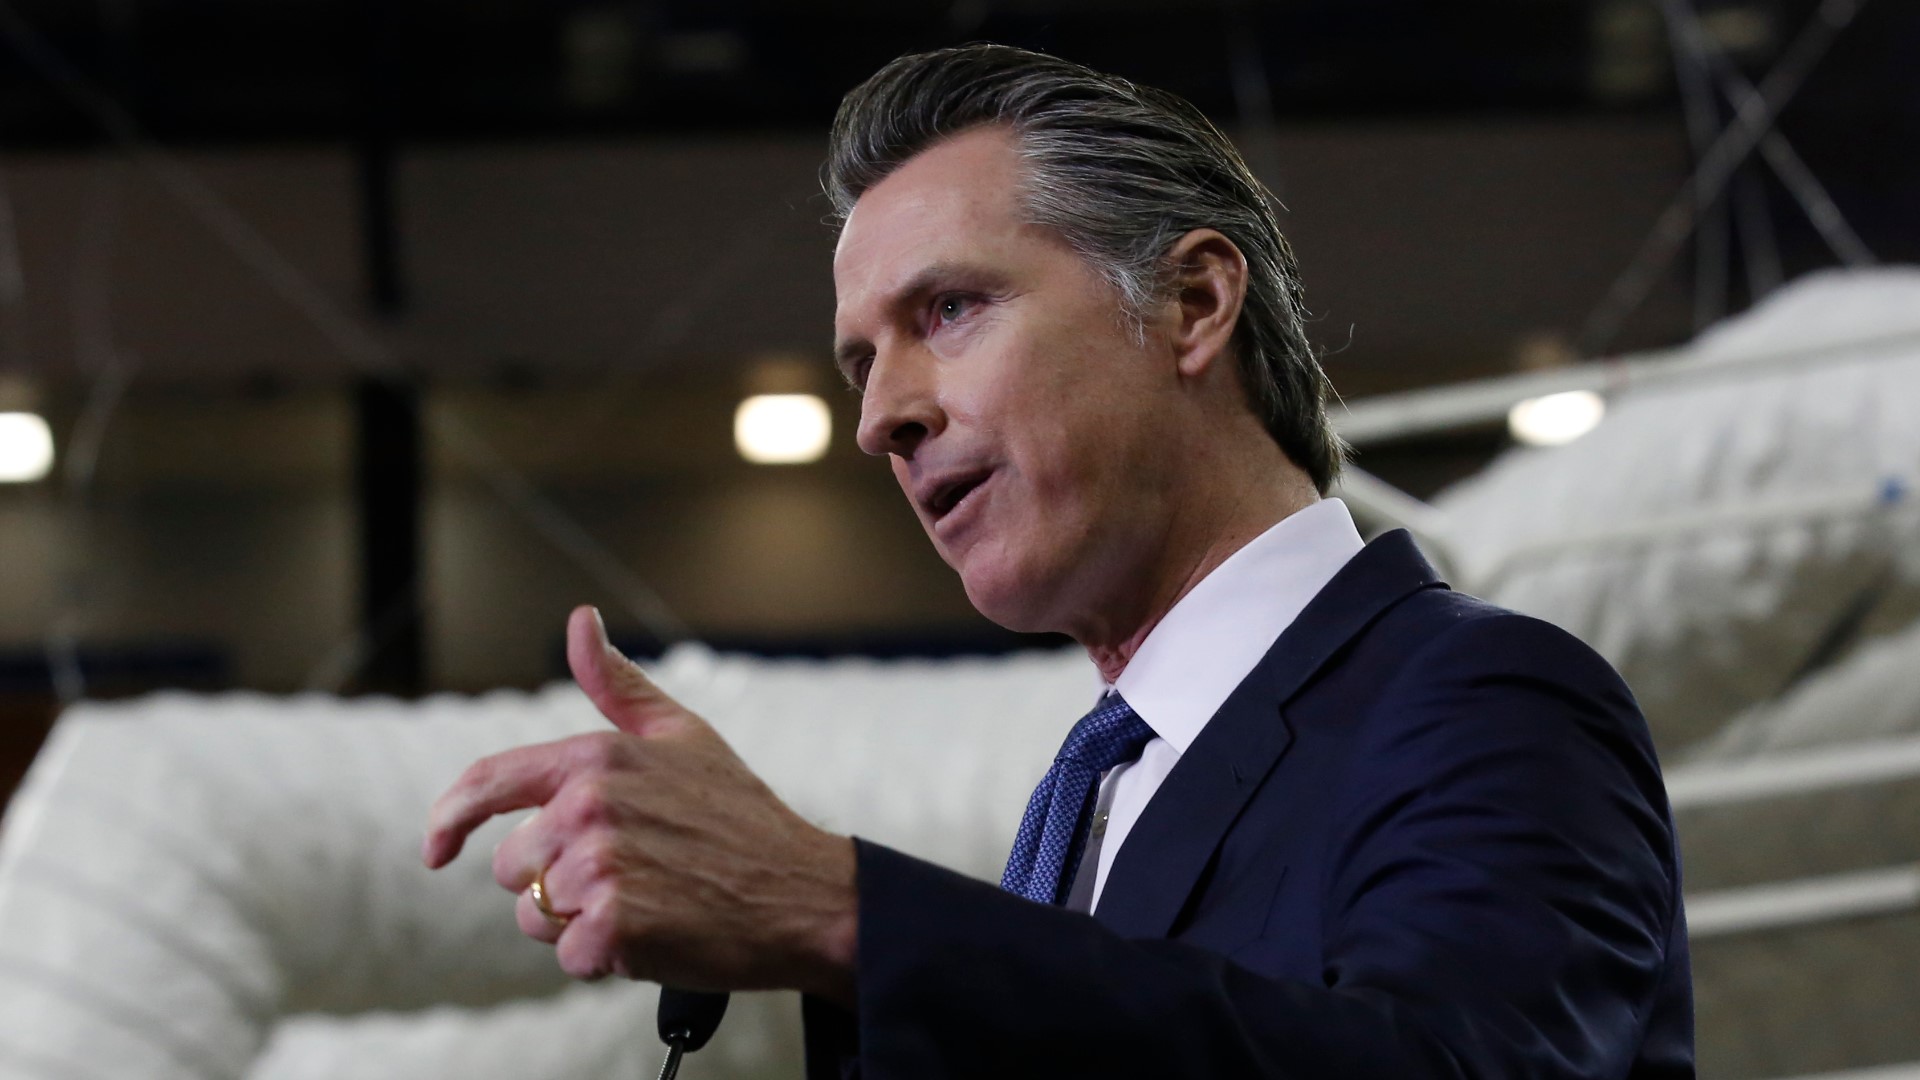 No definitive plan has been made for reopening schools, but California's governor announced that a sooner date could address "learning loss."